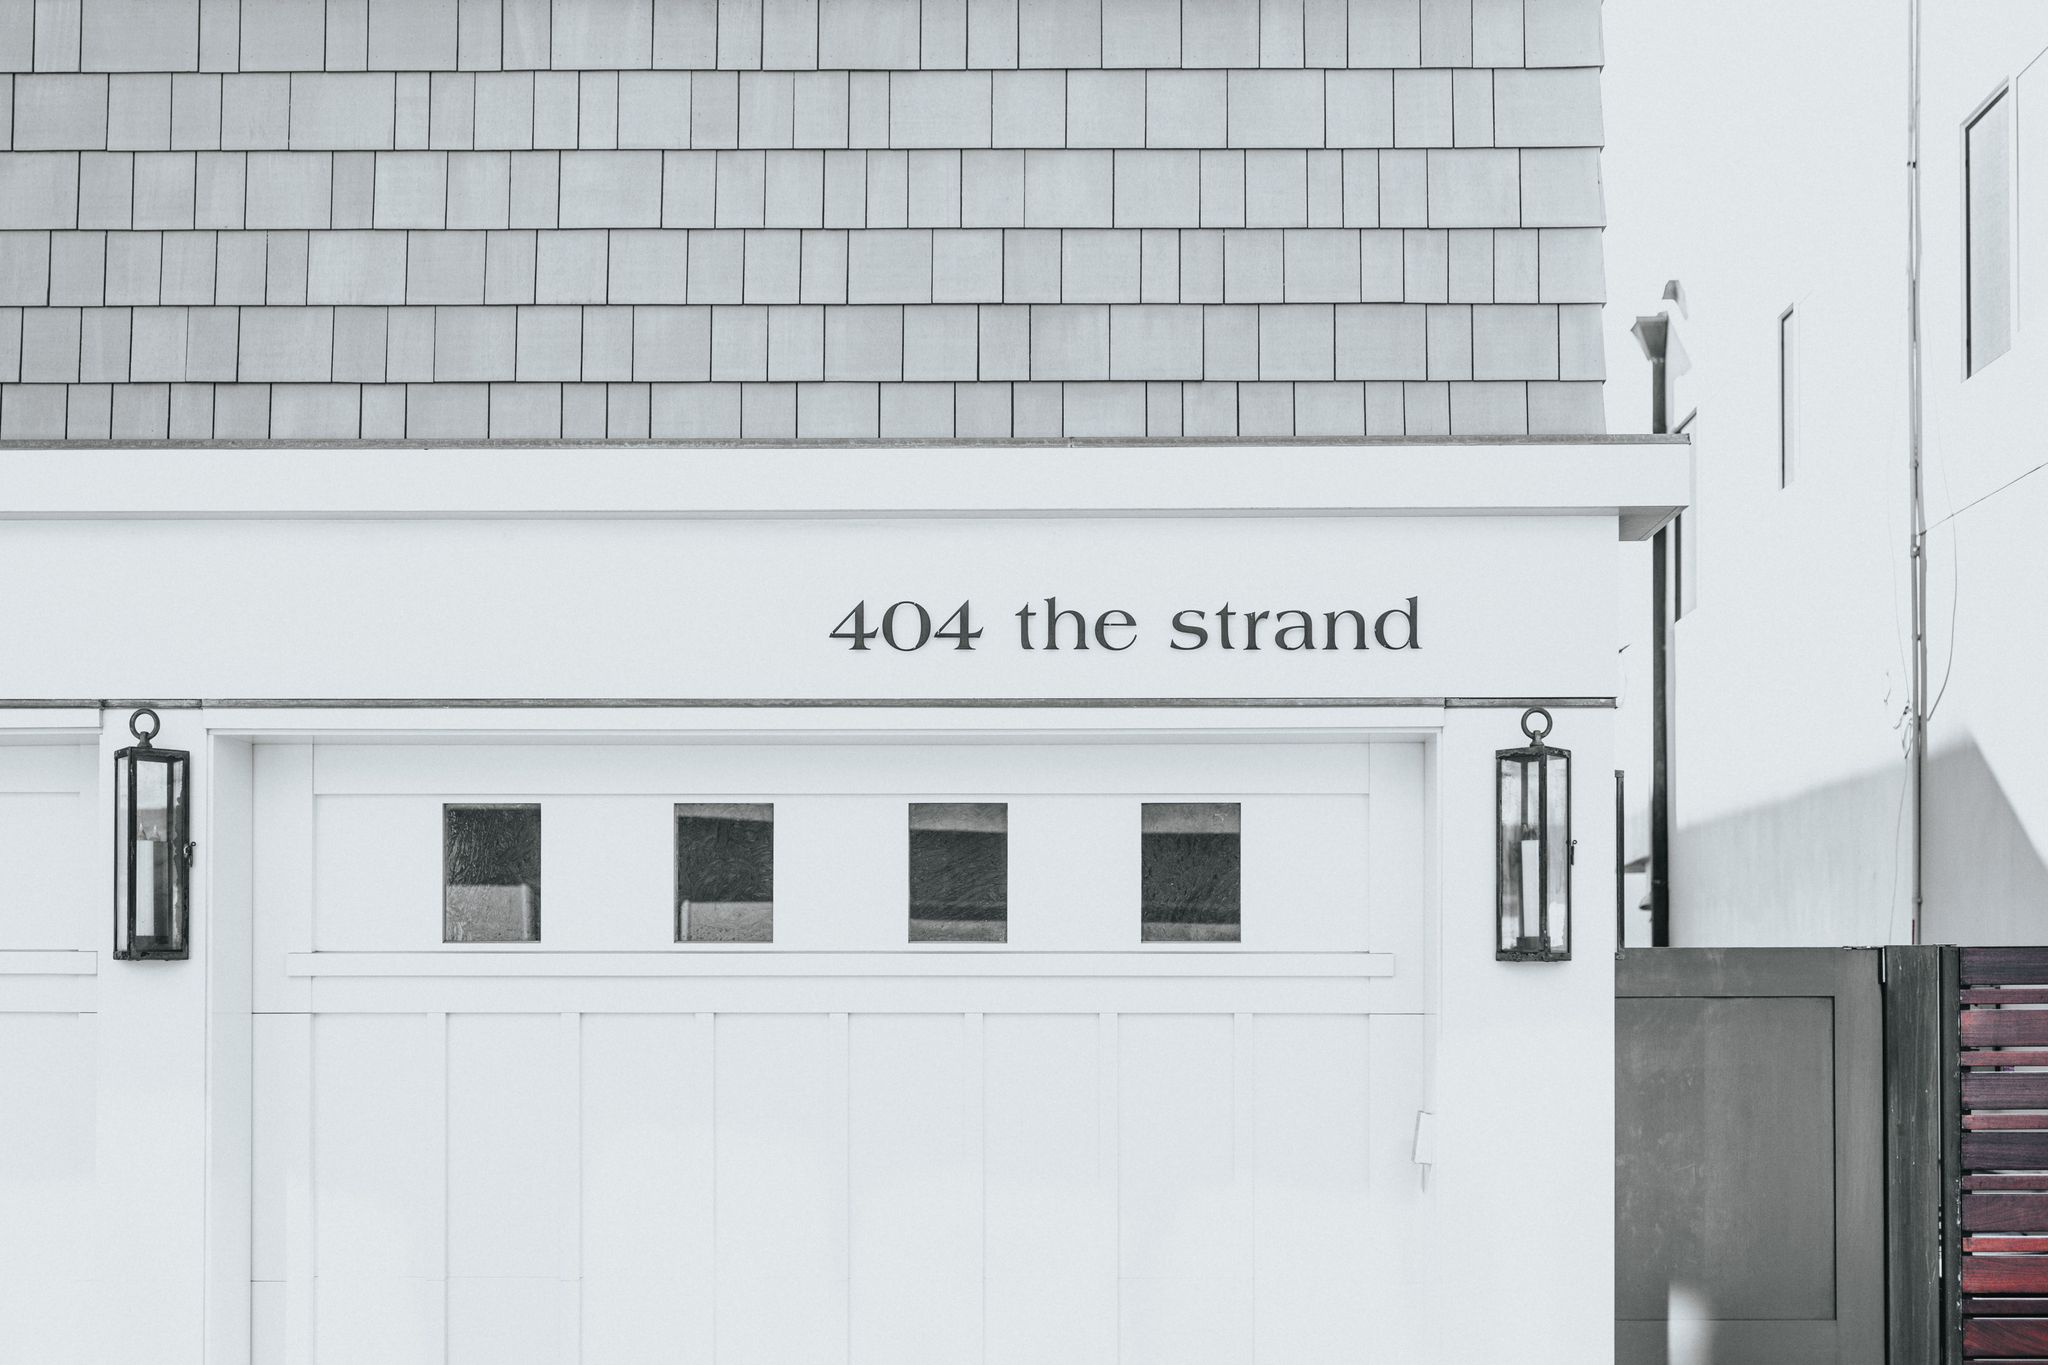 A house garage with the stree number and label '404 the strand'.